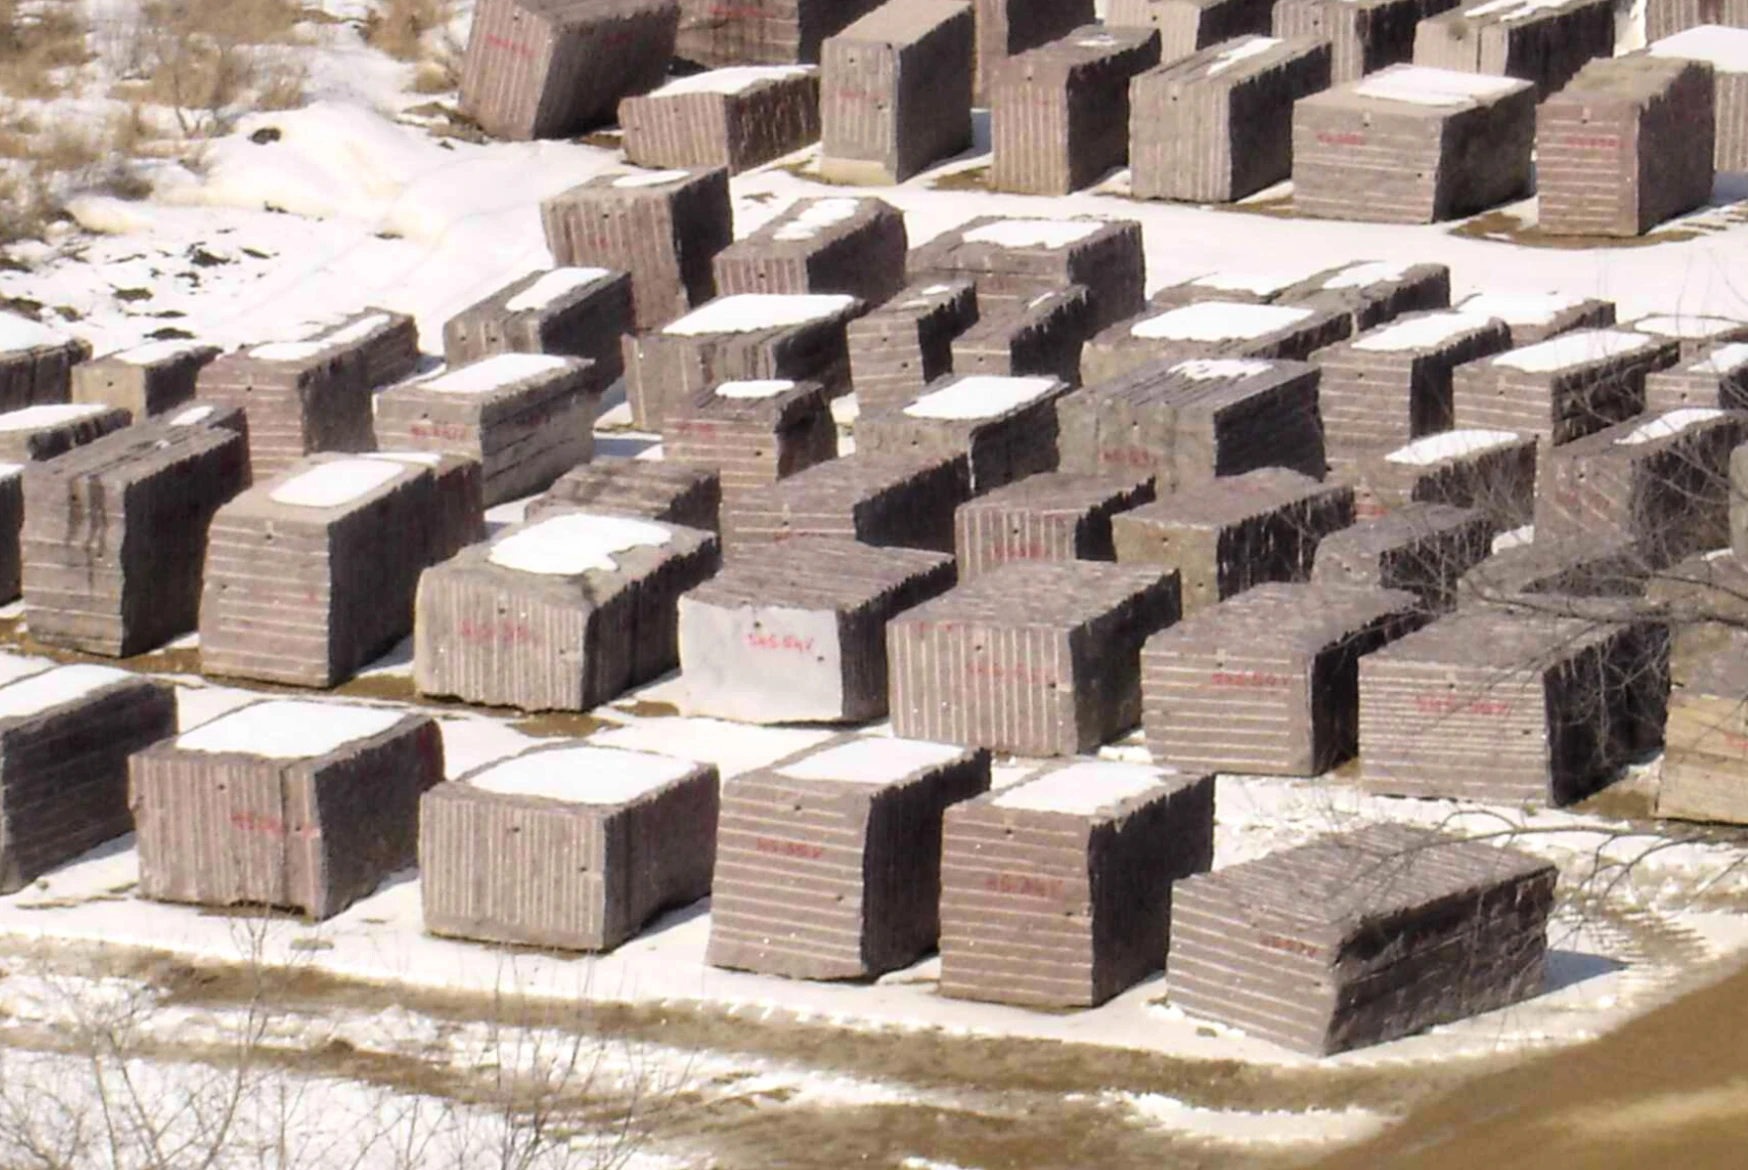 A bunch of concrete blocks are stacked together